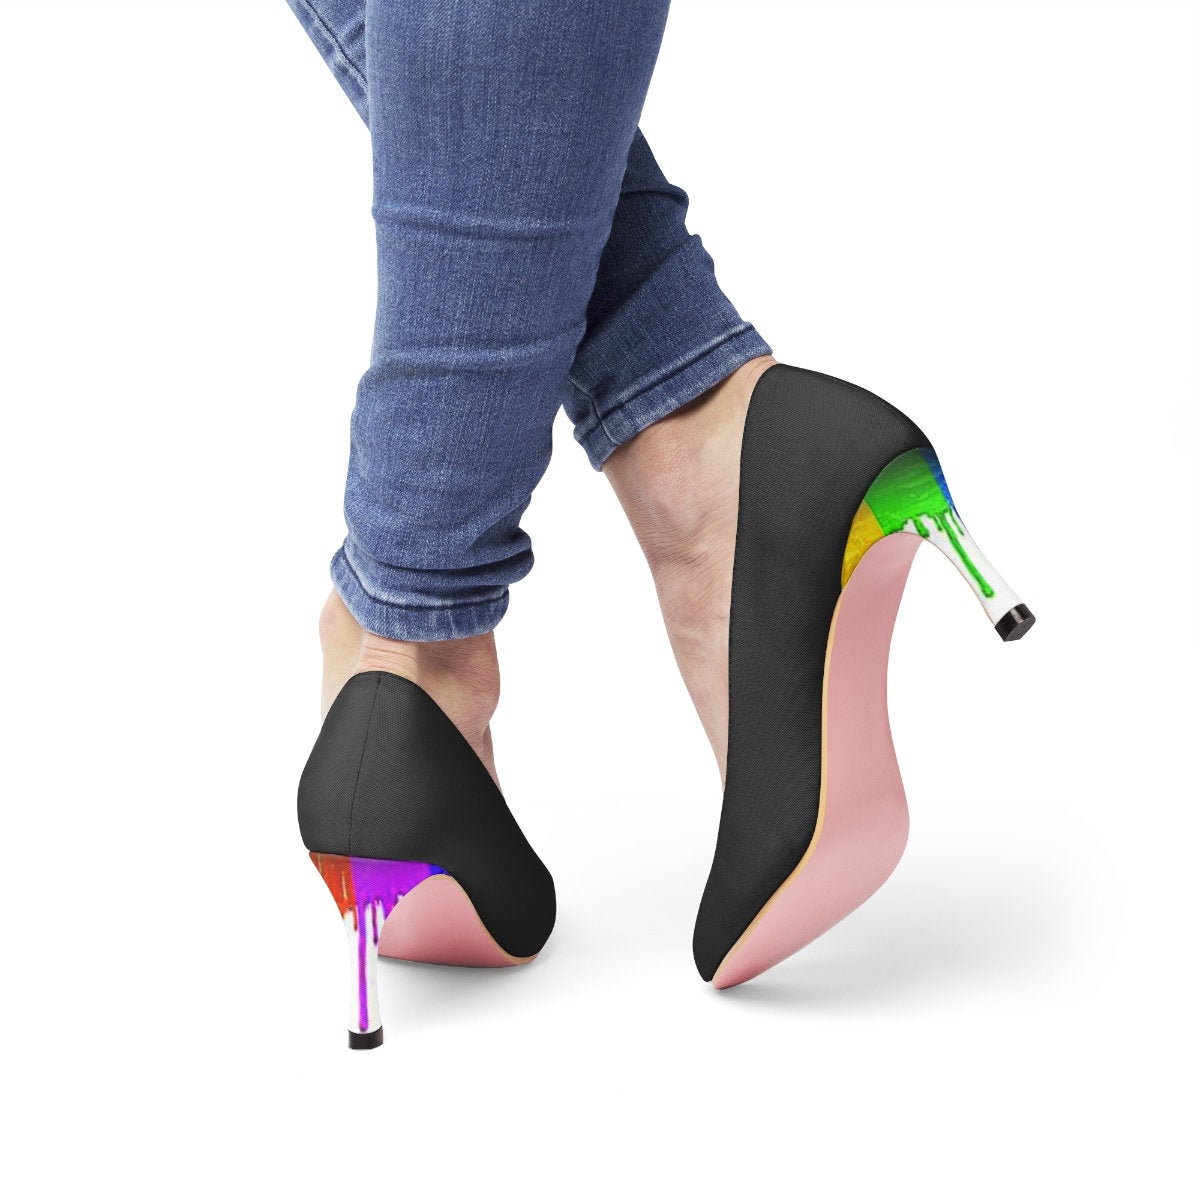 if you like share  my #etsy shop: Women's High Heels - TGIF etsy.me/31Cp2K0 #clothing #shoes #children #lowheels #highheels #pumps #blackshoes #womenshoe #womenclothing